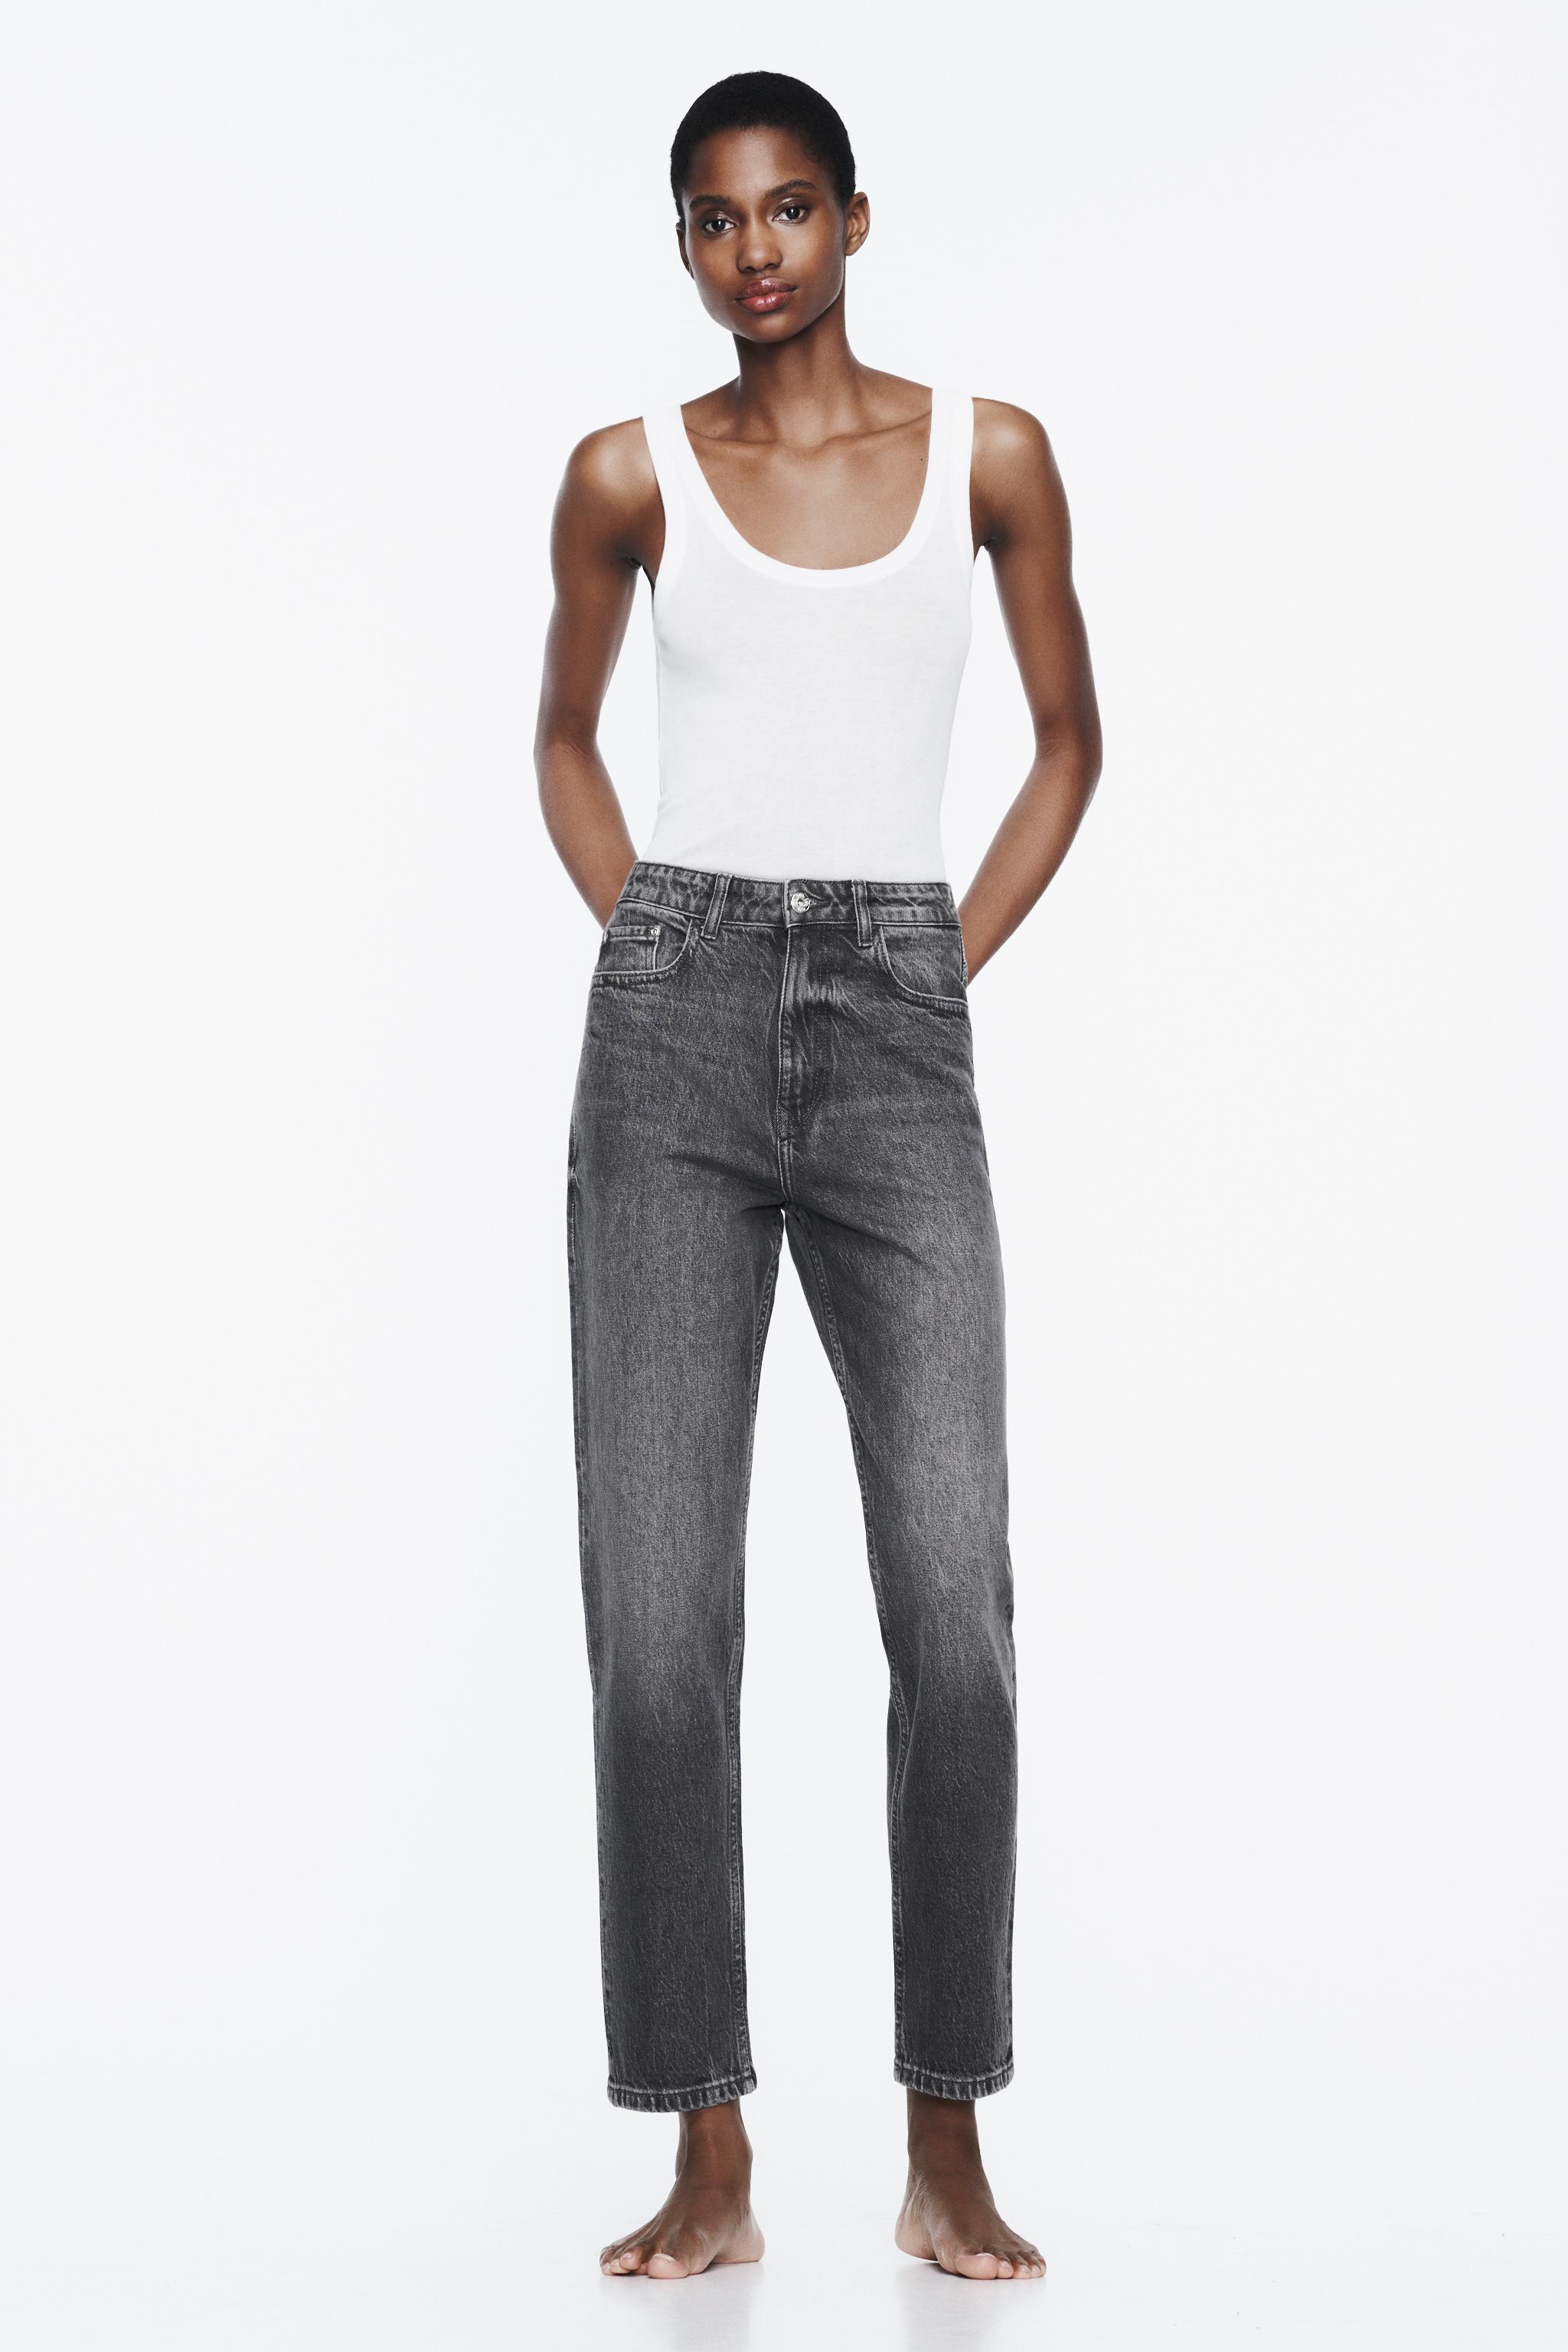 Zara FAUX LEATHER MOM FIT PANTS